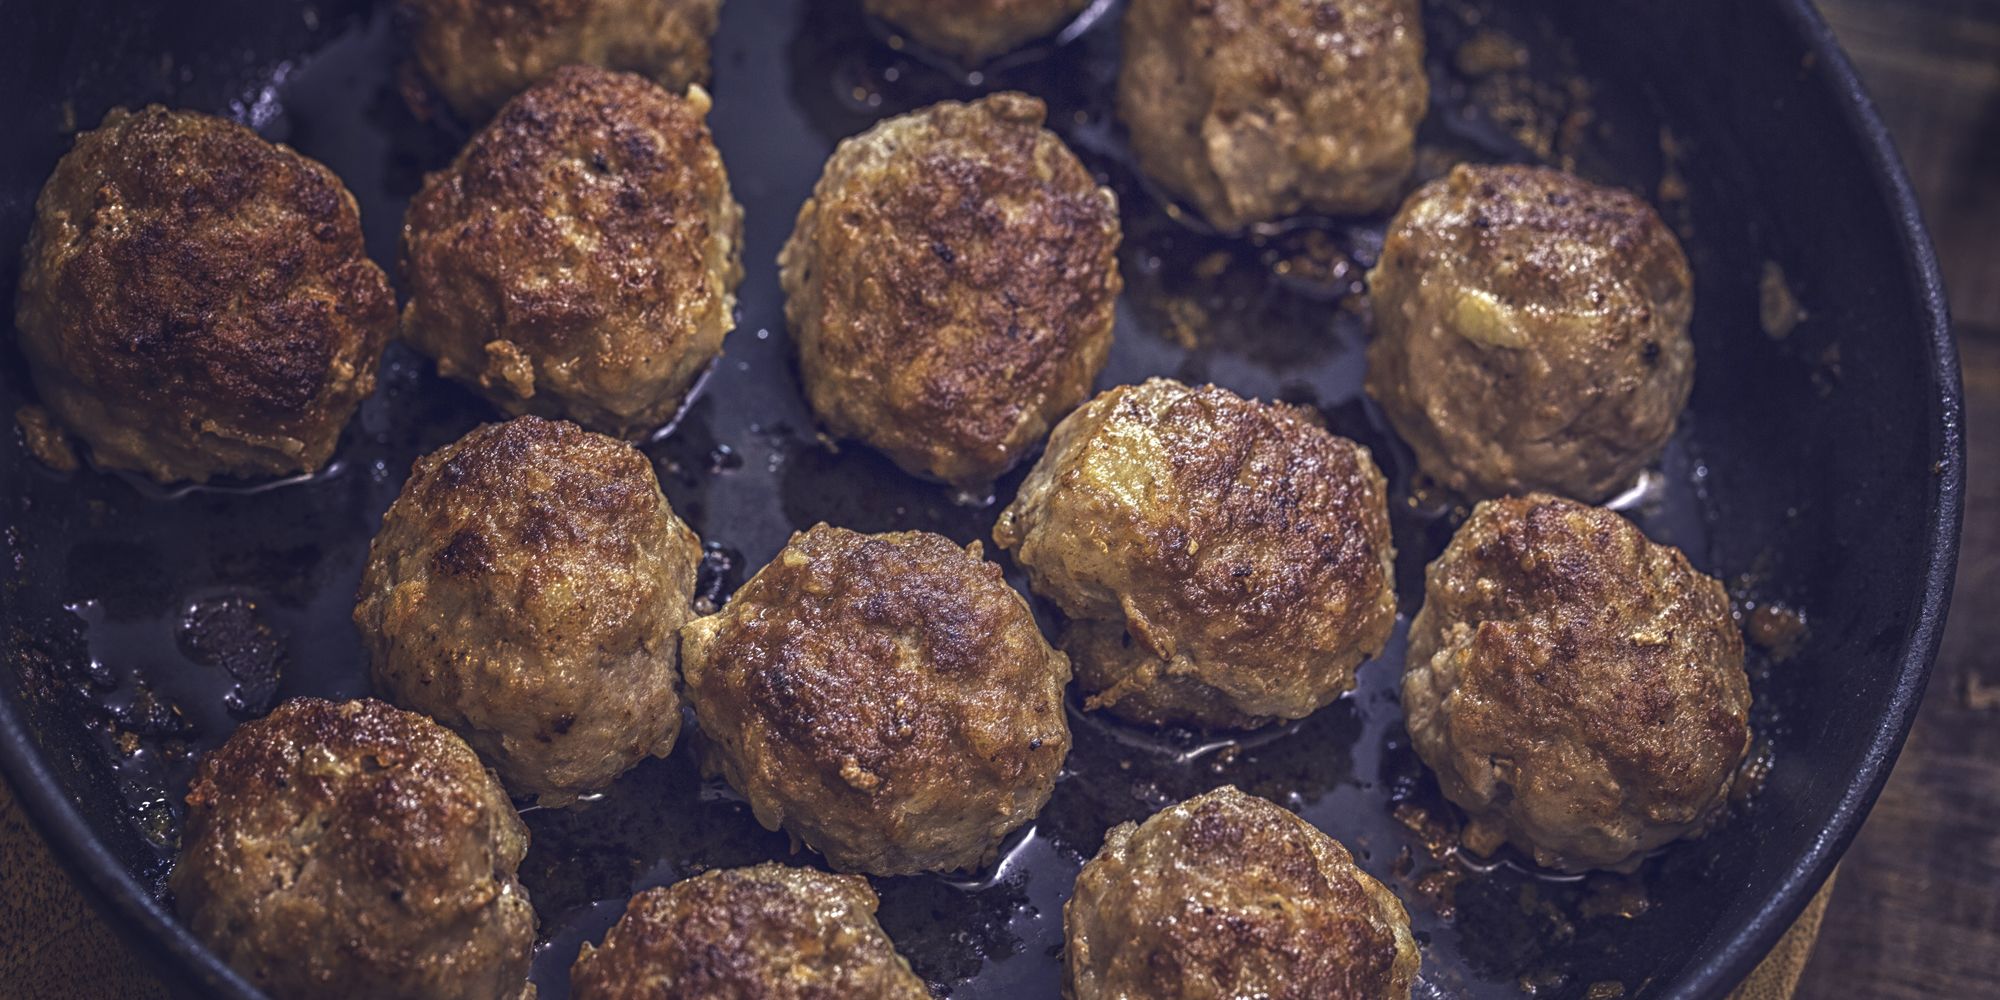 In Search of the Perfect Meatball